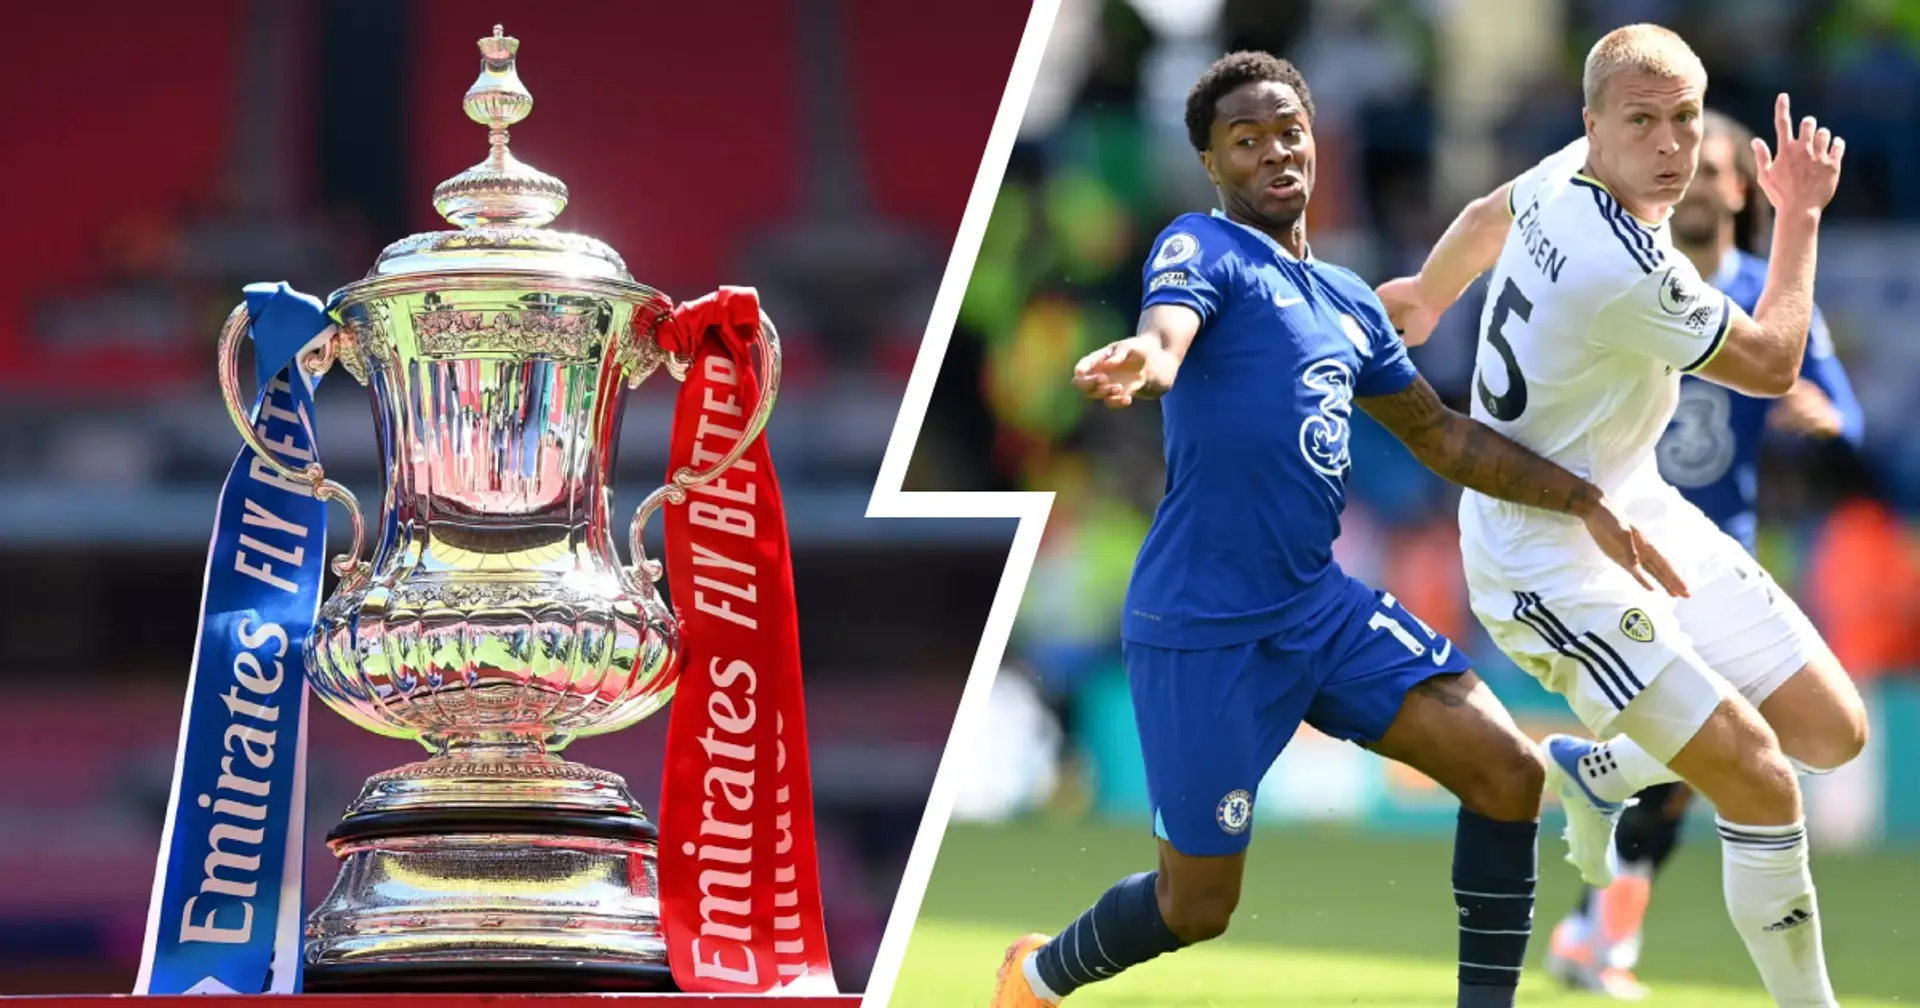 Date confirmed for FA Cup fifth round tie v Leeds & 2 more under-radar stories at Chelsea